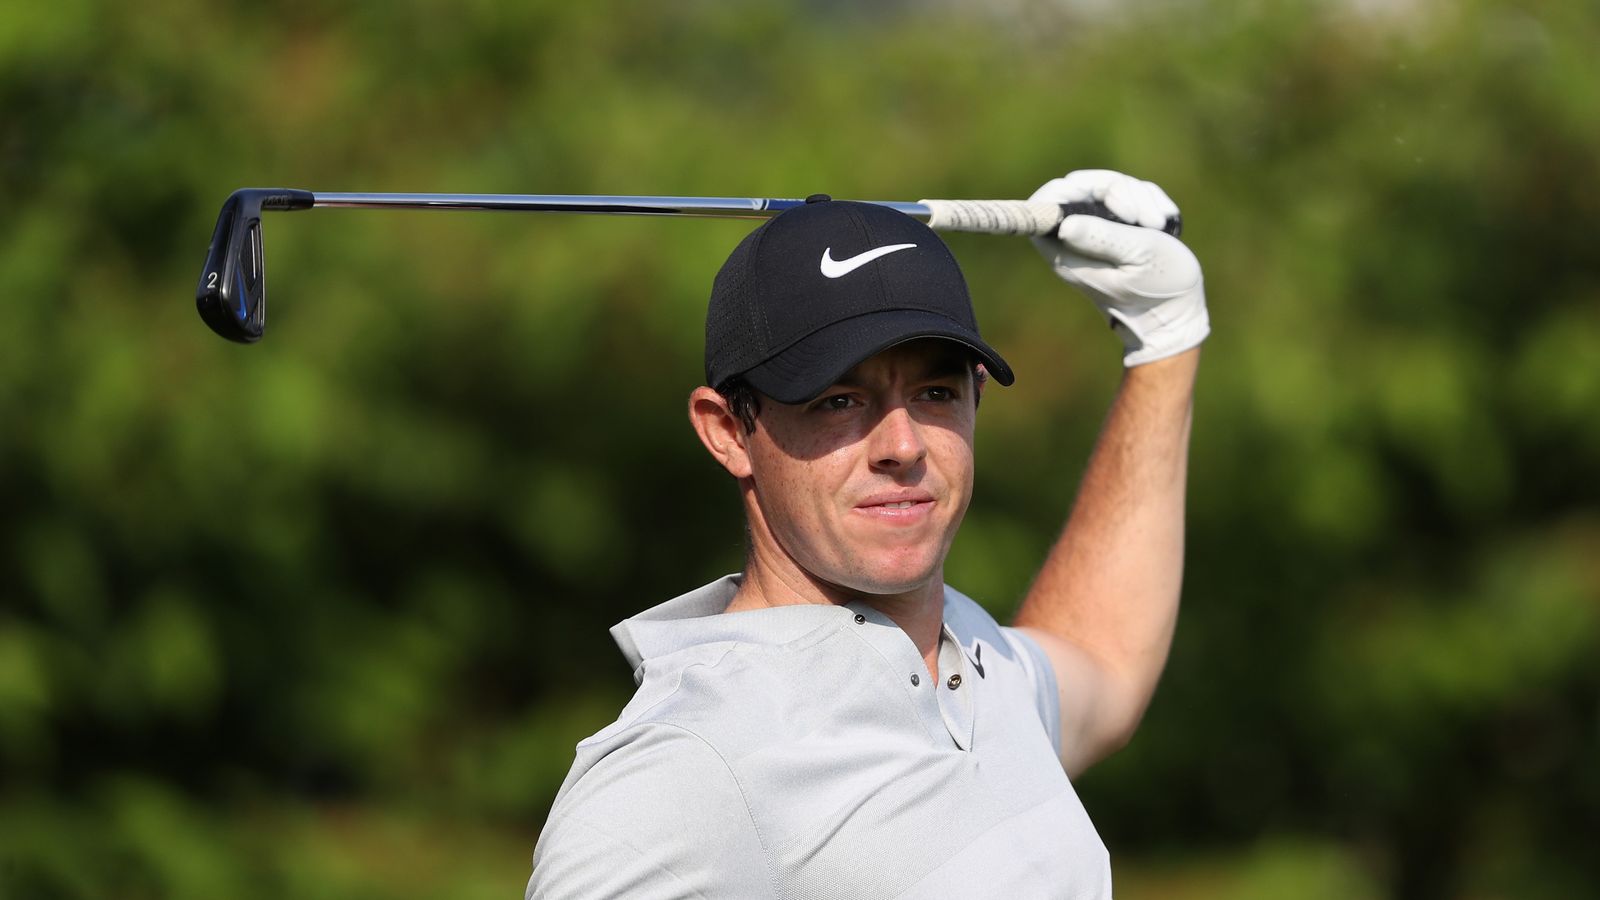 Rory McIlroy and Danny Willett slip to four over at US Open | Golf News ...